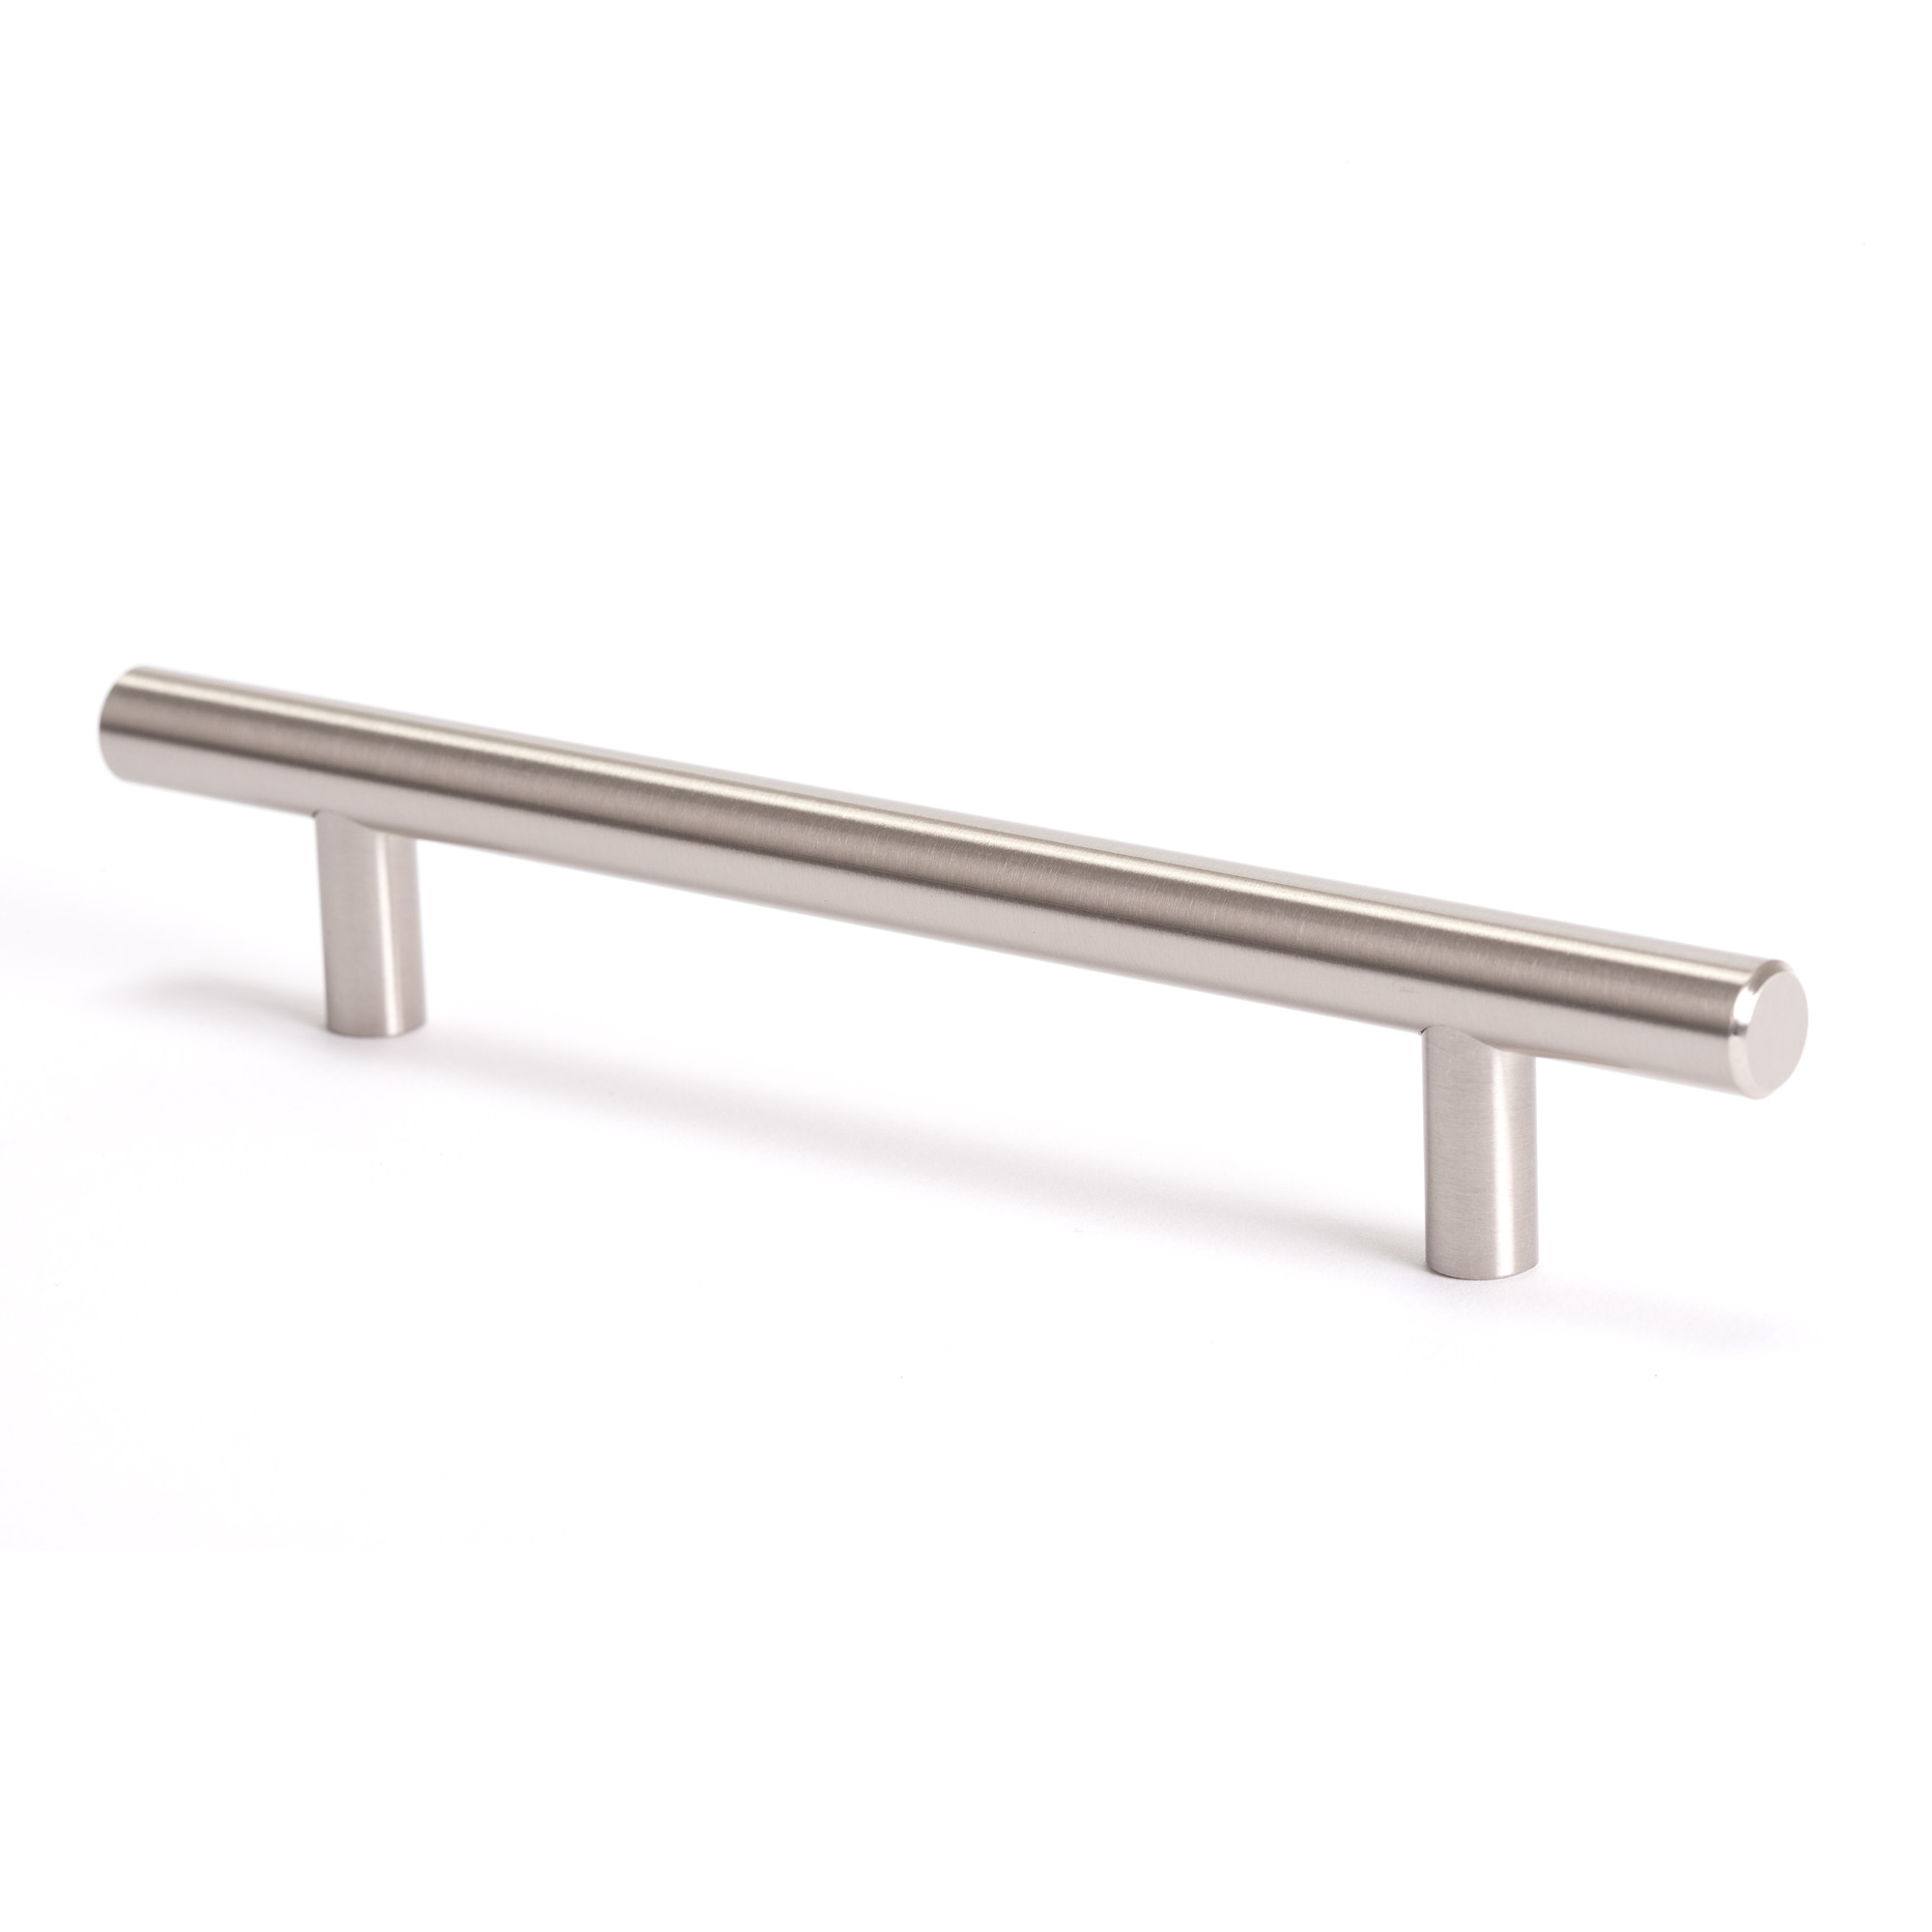 Advantage Plus 2 7-3/8" Pull in Brushed Nickel